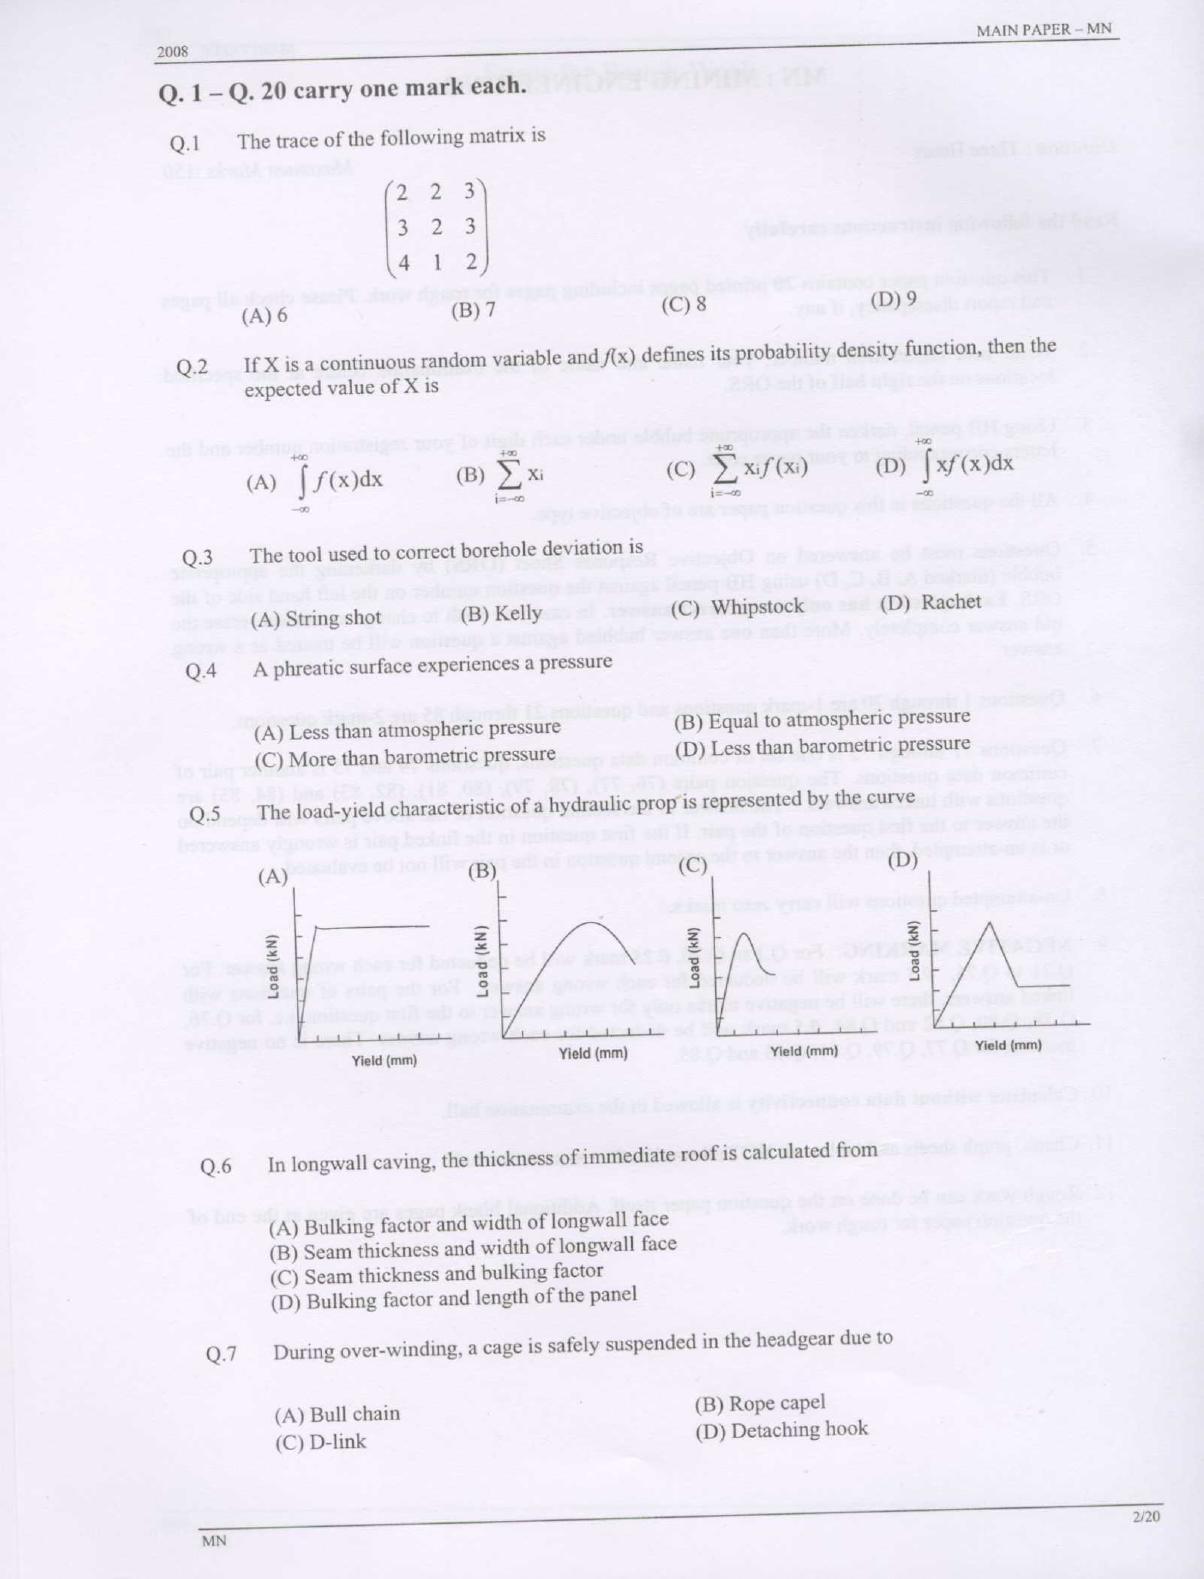 GATE 2008 Mining Engineering (MN) Question Paper with Answer Key - Page 2